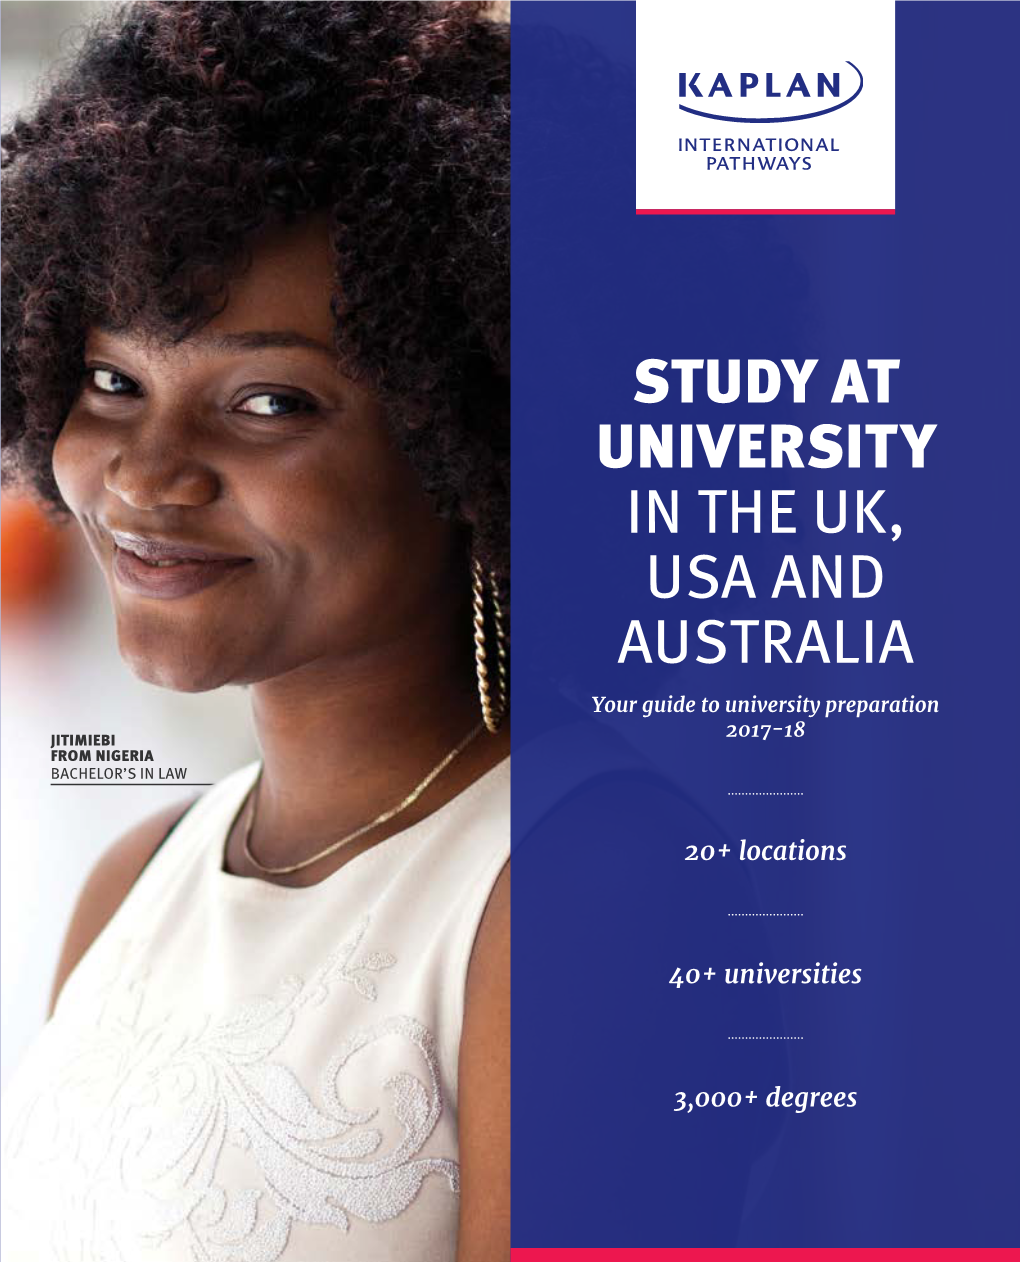 Study at University in the UK, USA and Australia Your Guide to University Preparation 2017-18 Jitimiebi from Nigeria Bachelor’S in Law